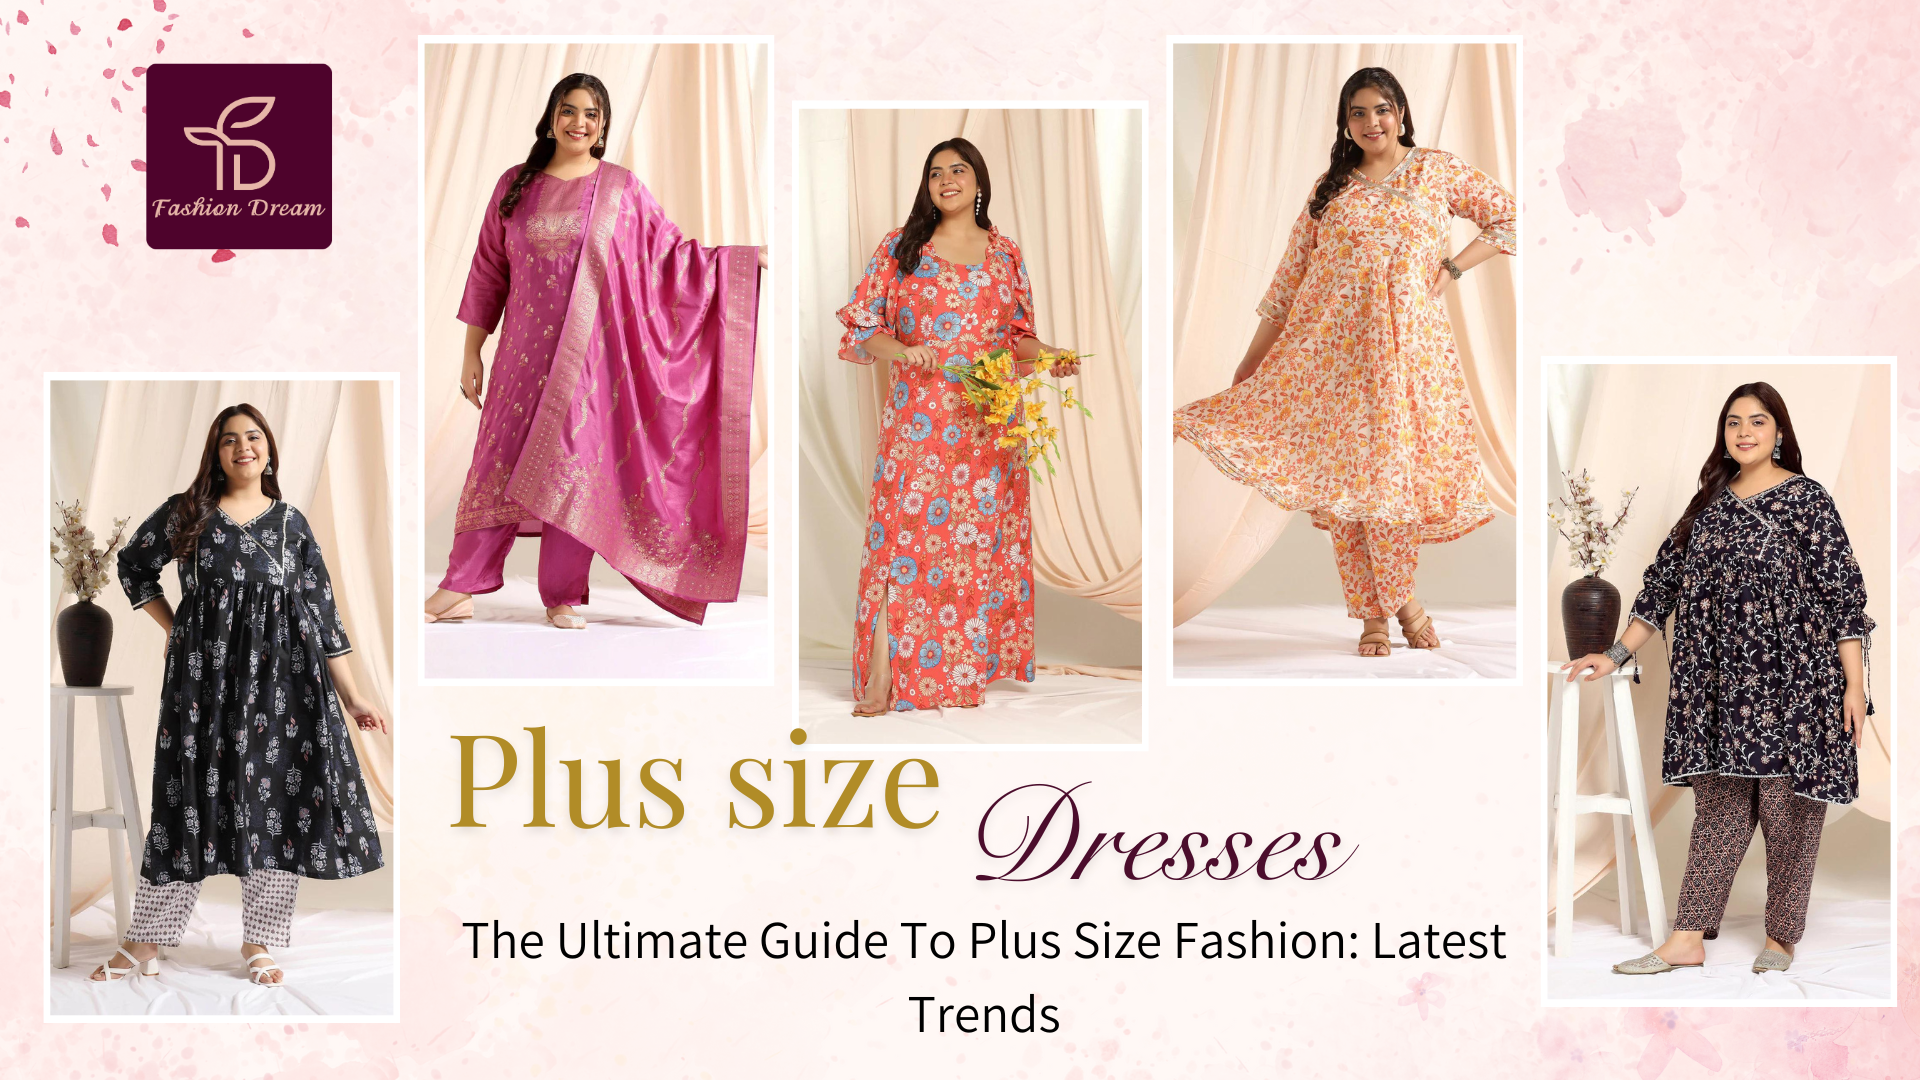 The Ultimate Guide To Plus Size Fashion: Latest Trends